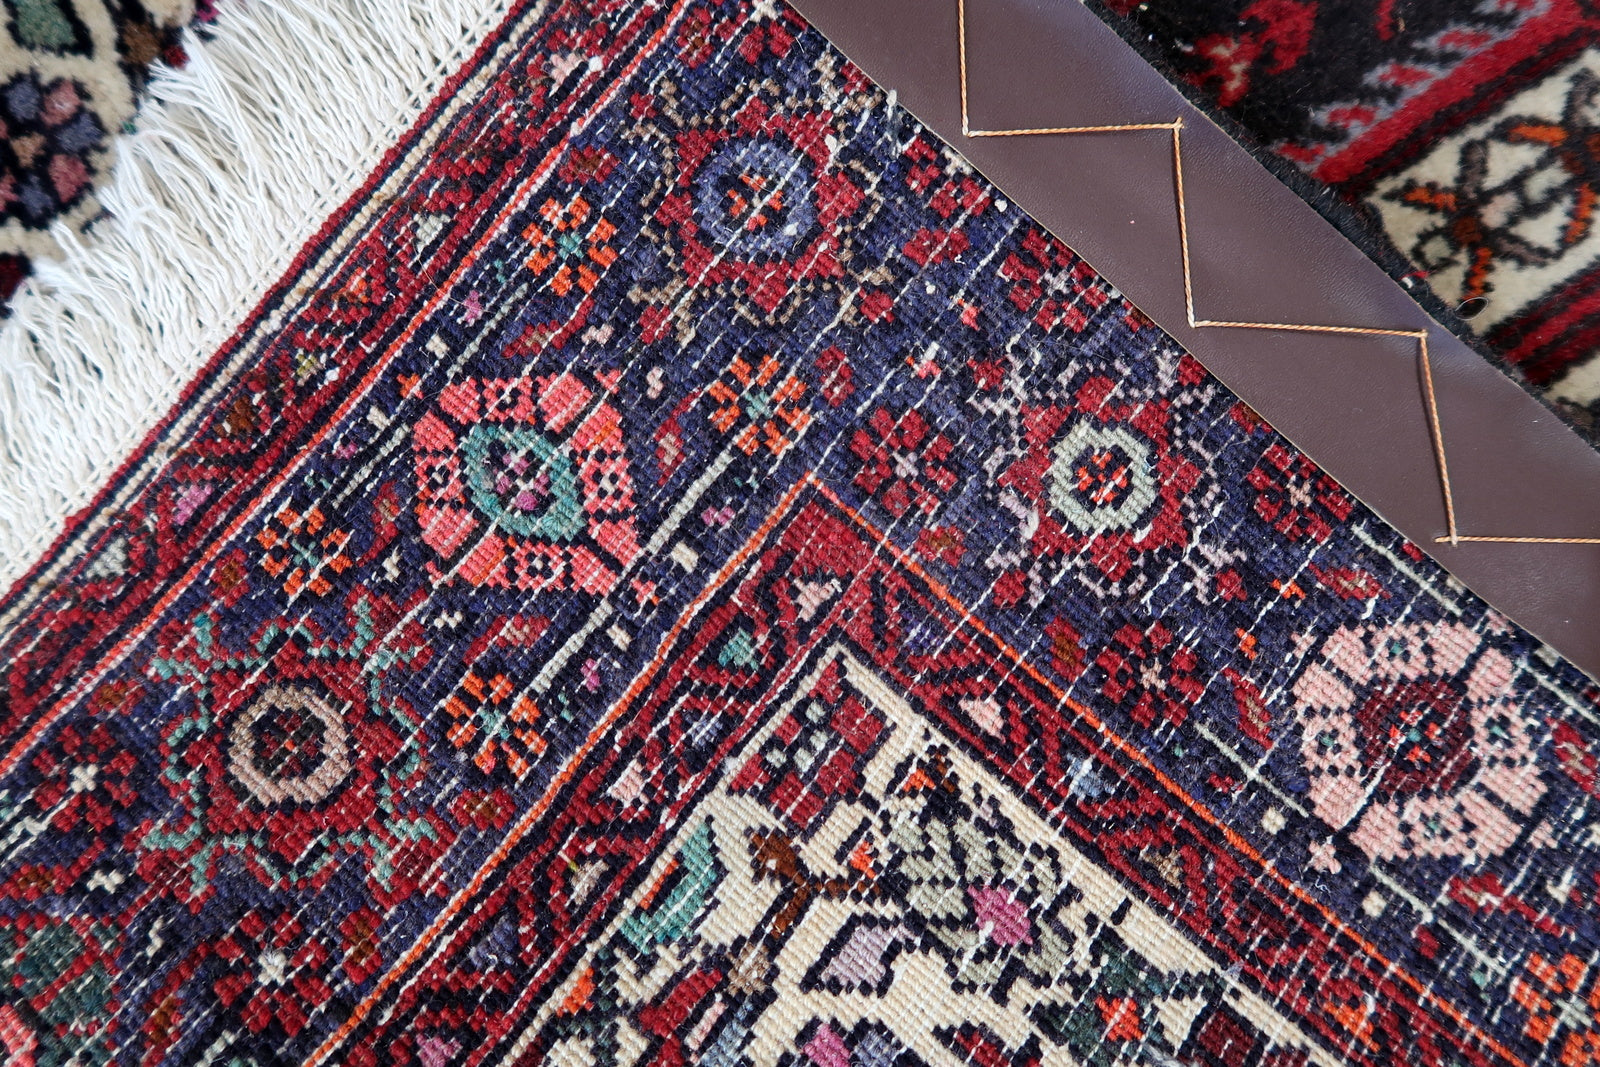 Handmade vintage Persian Bidjar woolen rug. The rug is from the end of 20th century, it is in original good condition. The rug is in traditional design with large medallion in the center. The color combination is white and red.